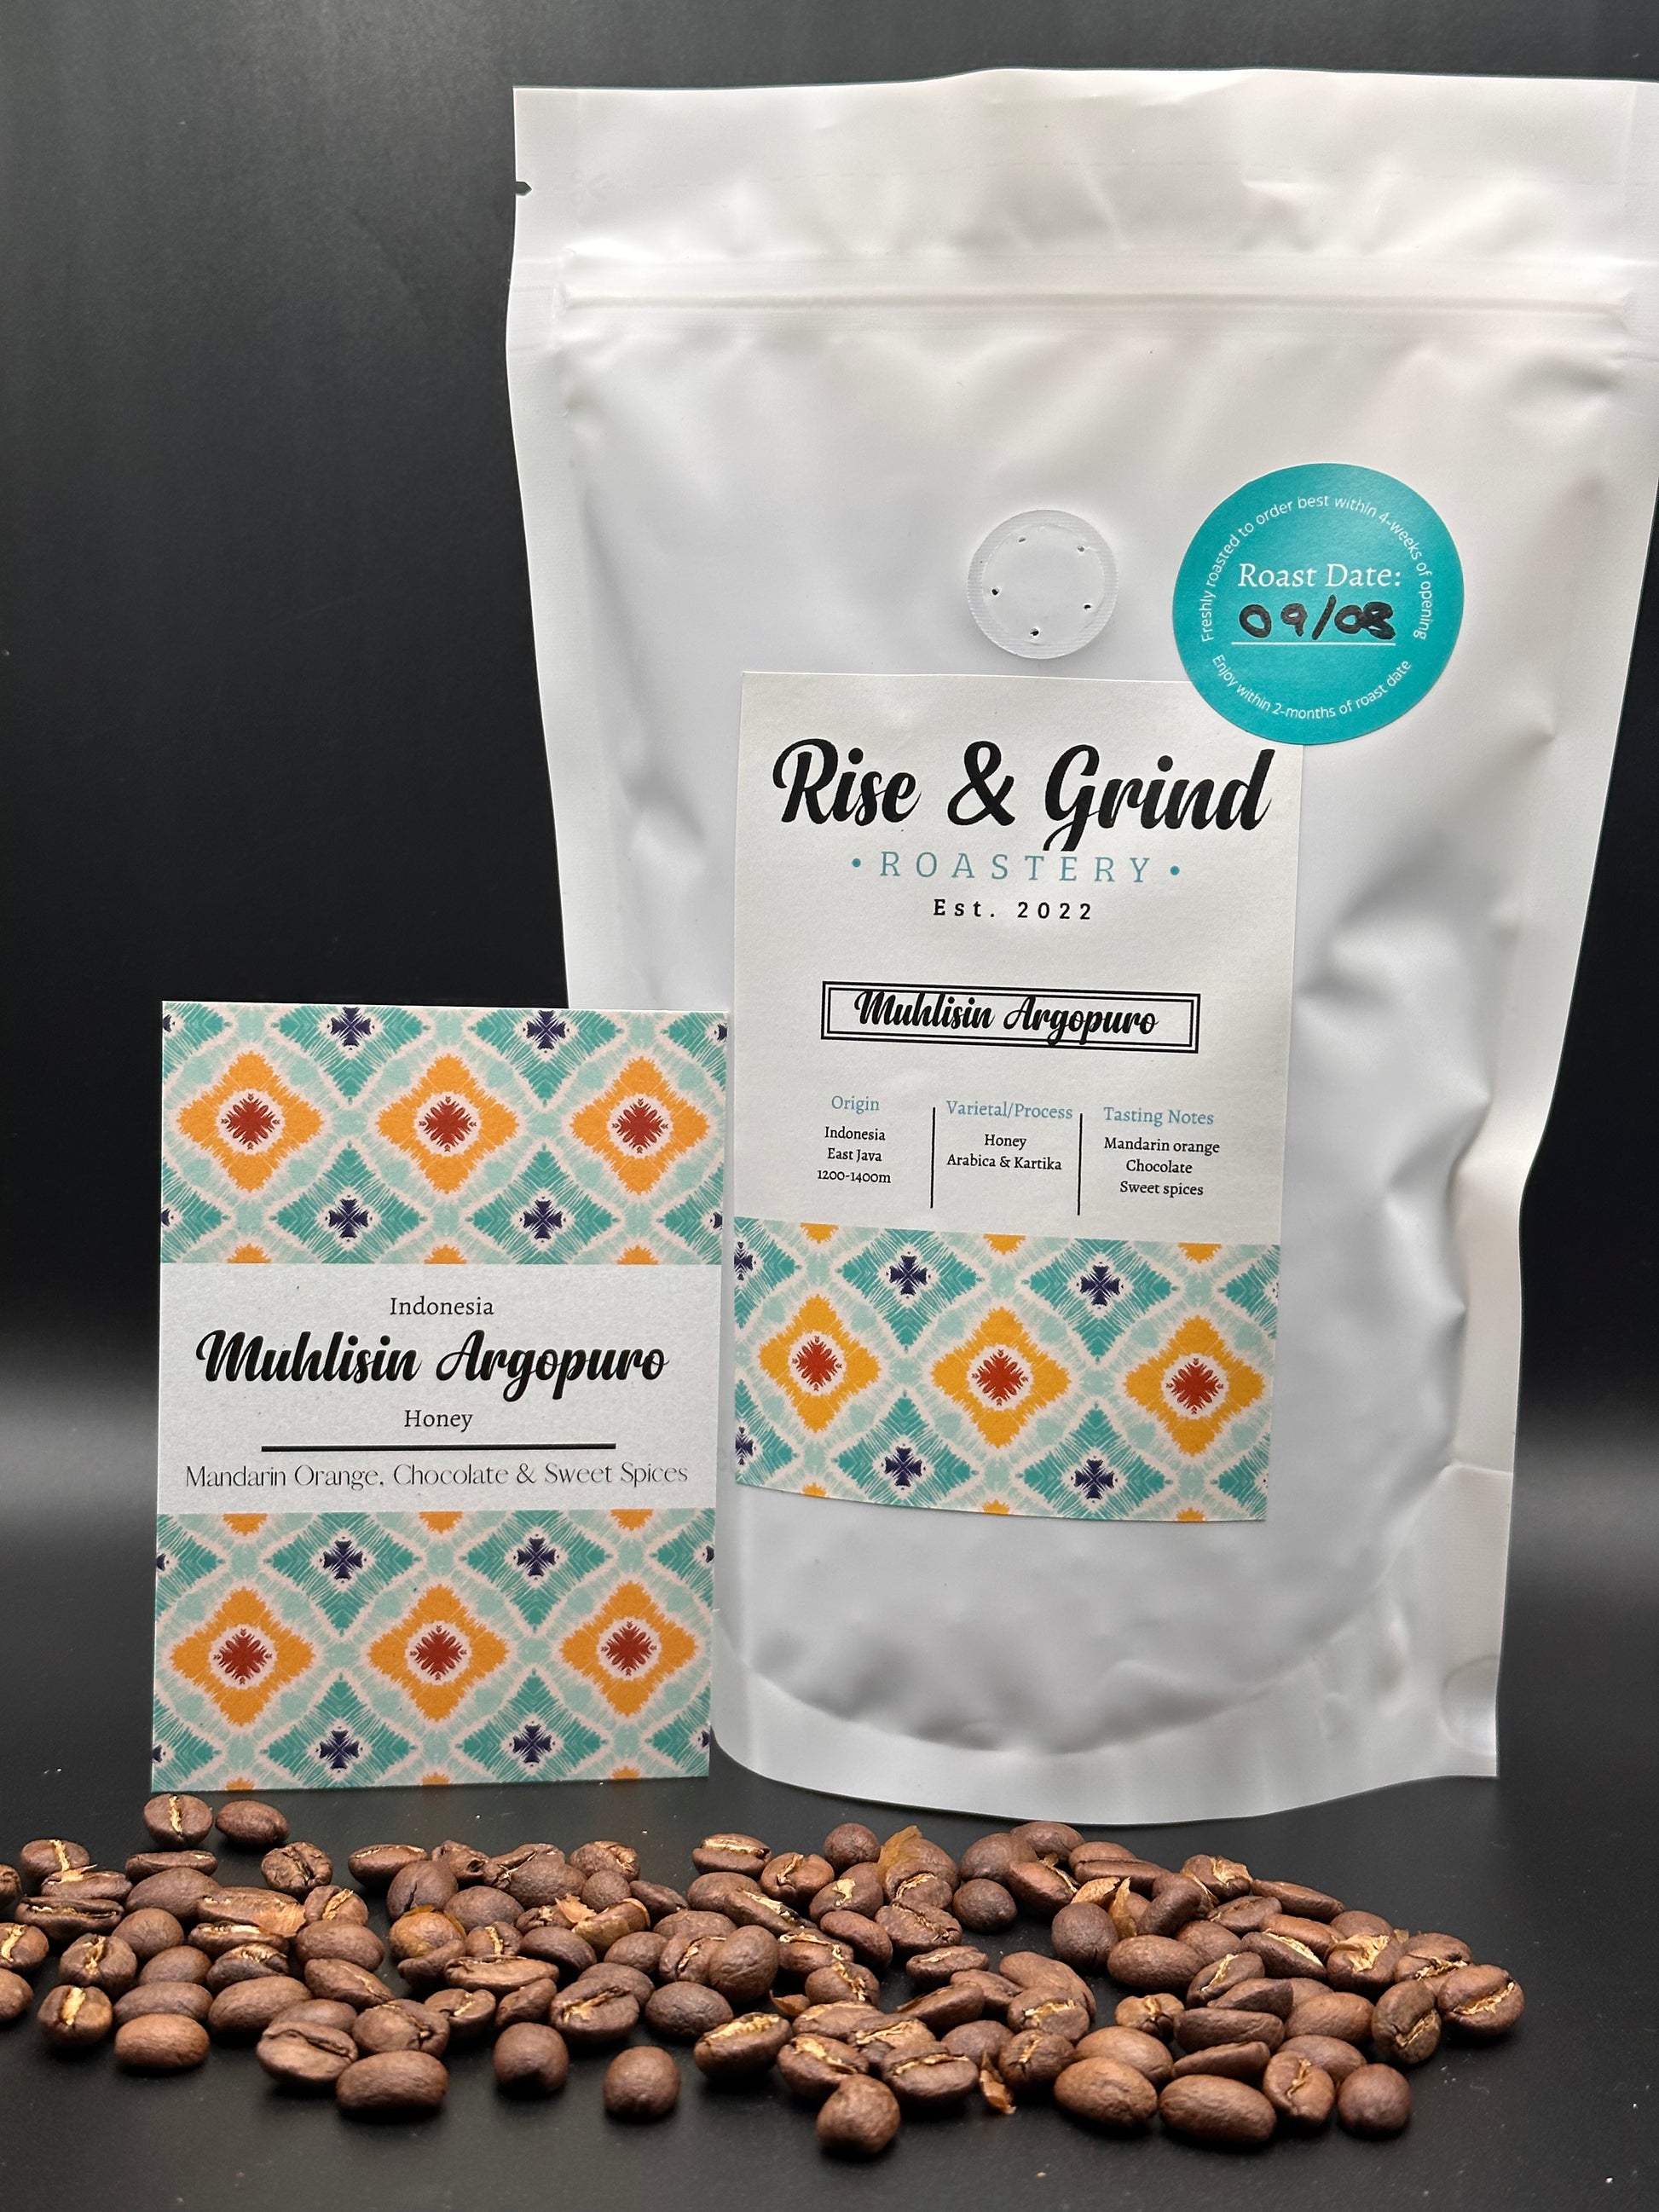 Discover the world of specialty coffee with our monthly subscription service. Each month, indulge in a new coffee experience, meticulously curated and freshly roasted to perfection. Join us on a journey of exploration and delight as we showcase the finest beans from around the globe, delivered conveniently to your doorstep. Bag 2